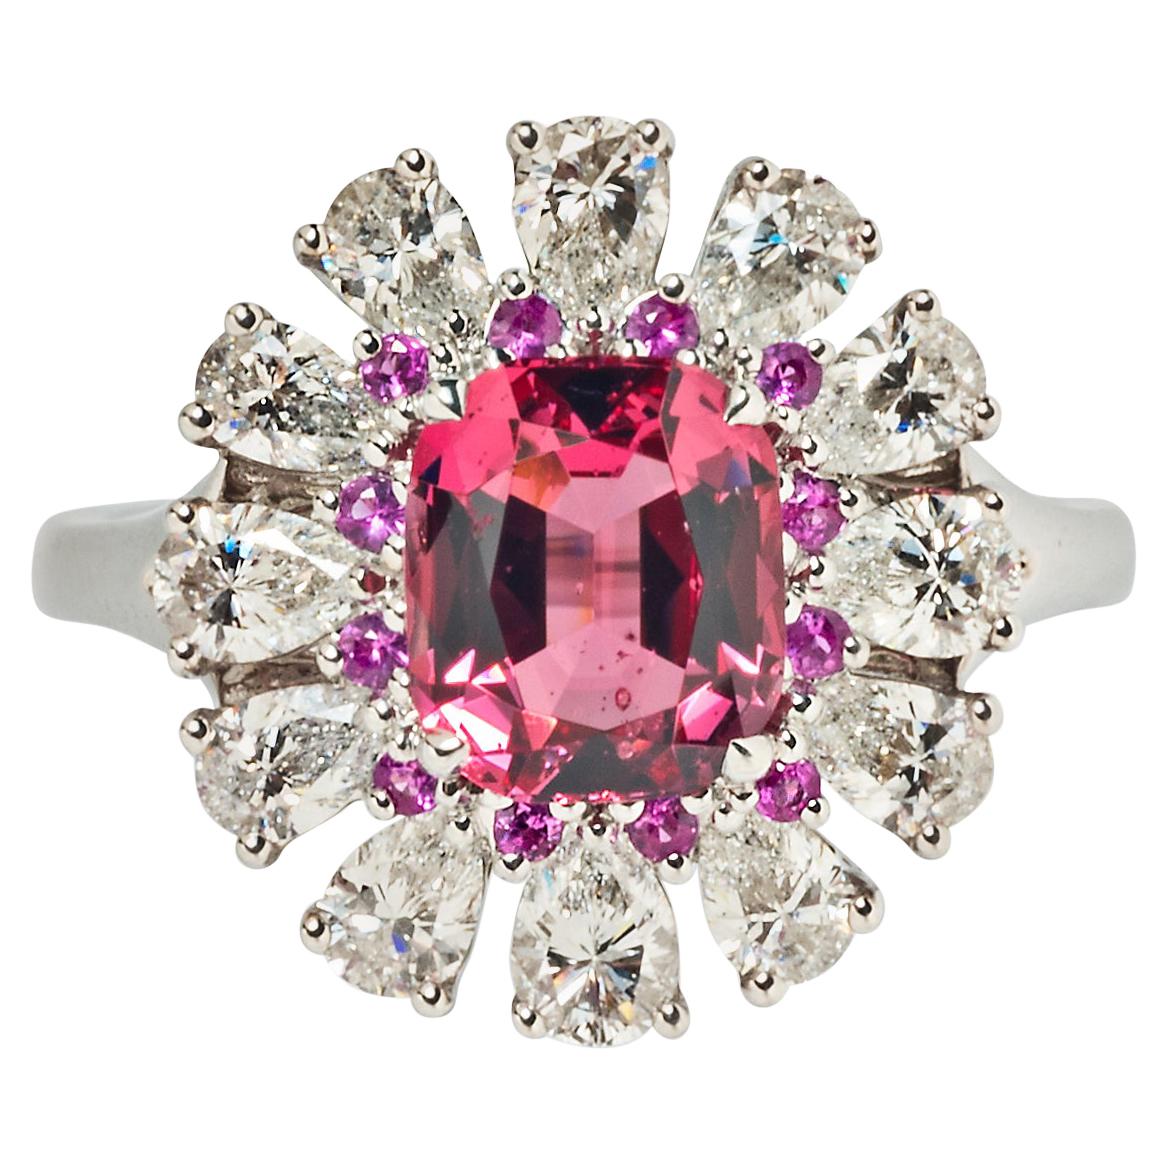 Pink Spinel, Pink Sapphire and Diamond Ring